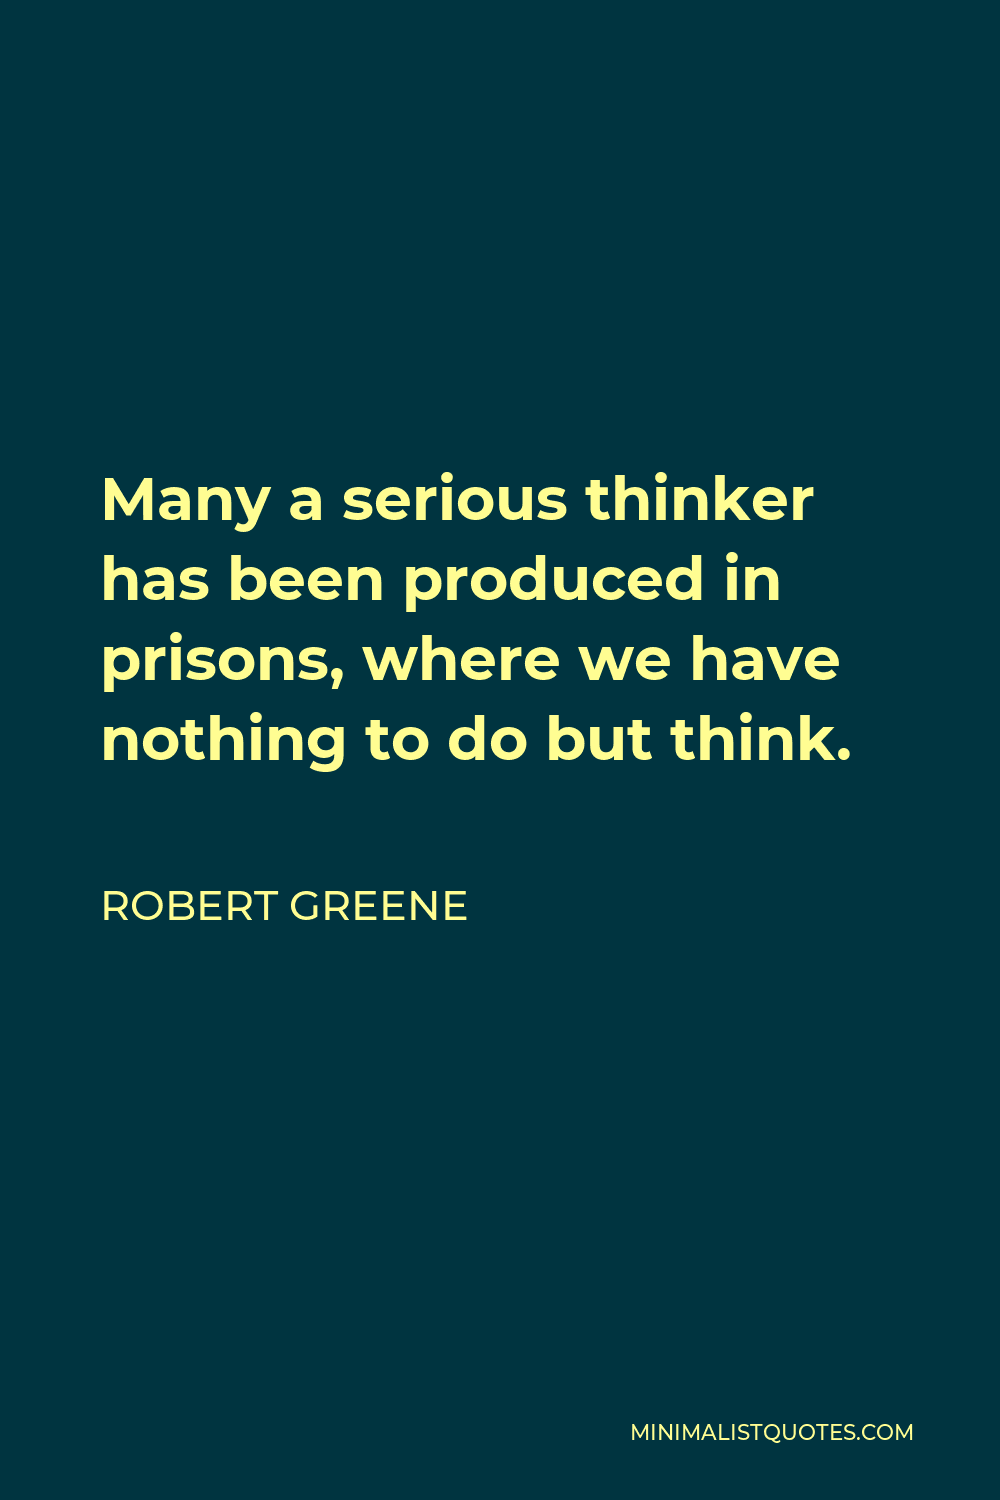 Robert Greene Quote - Many a serious thinker has been produced in prisons, where we have nothing to do but think.